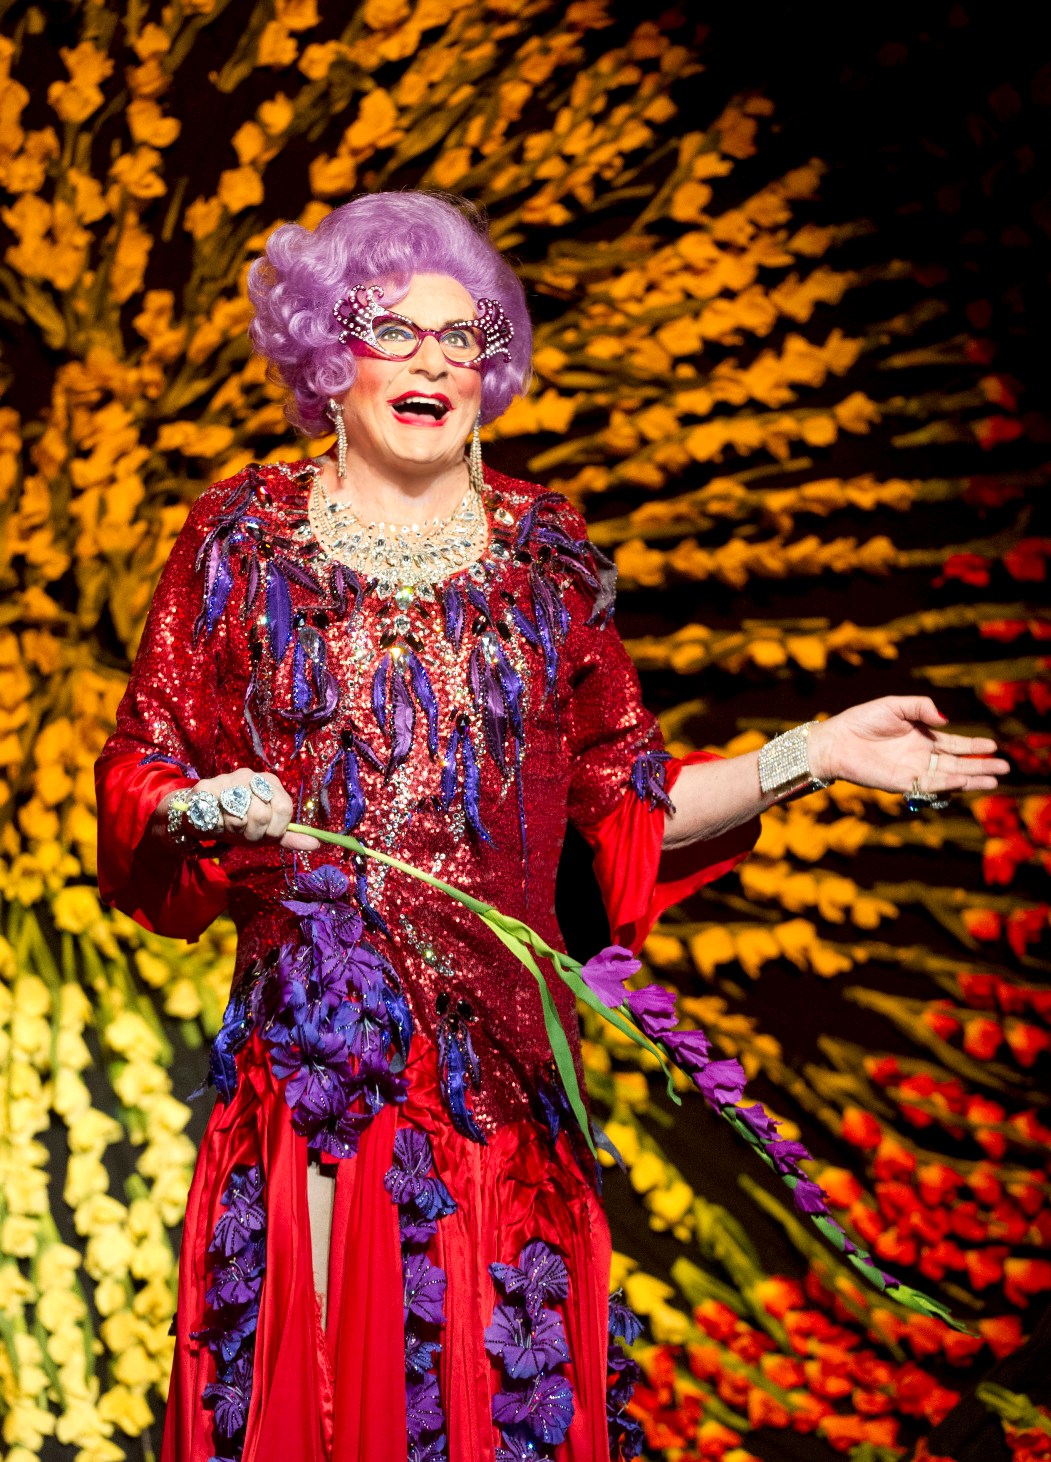 Floral finale to Dame Edna's farewell by Alastair Muir